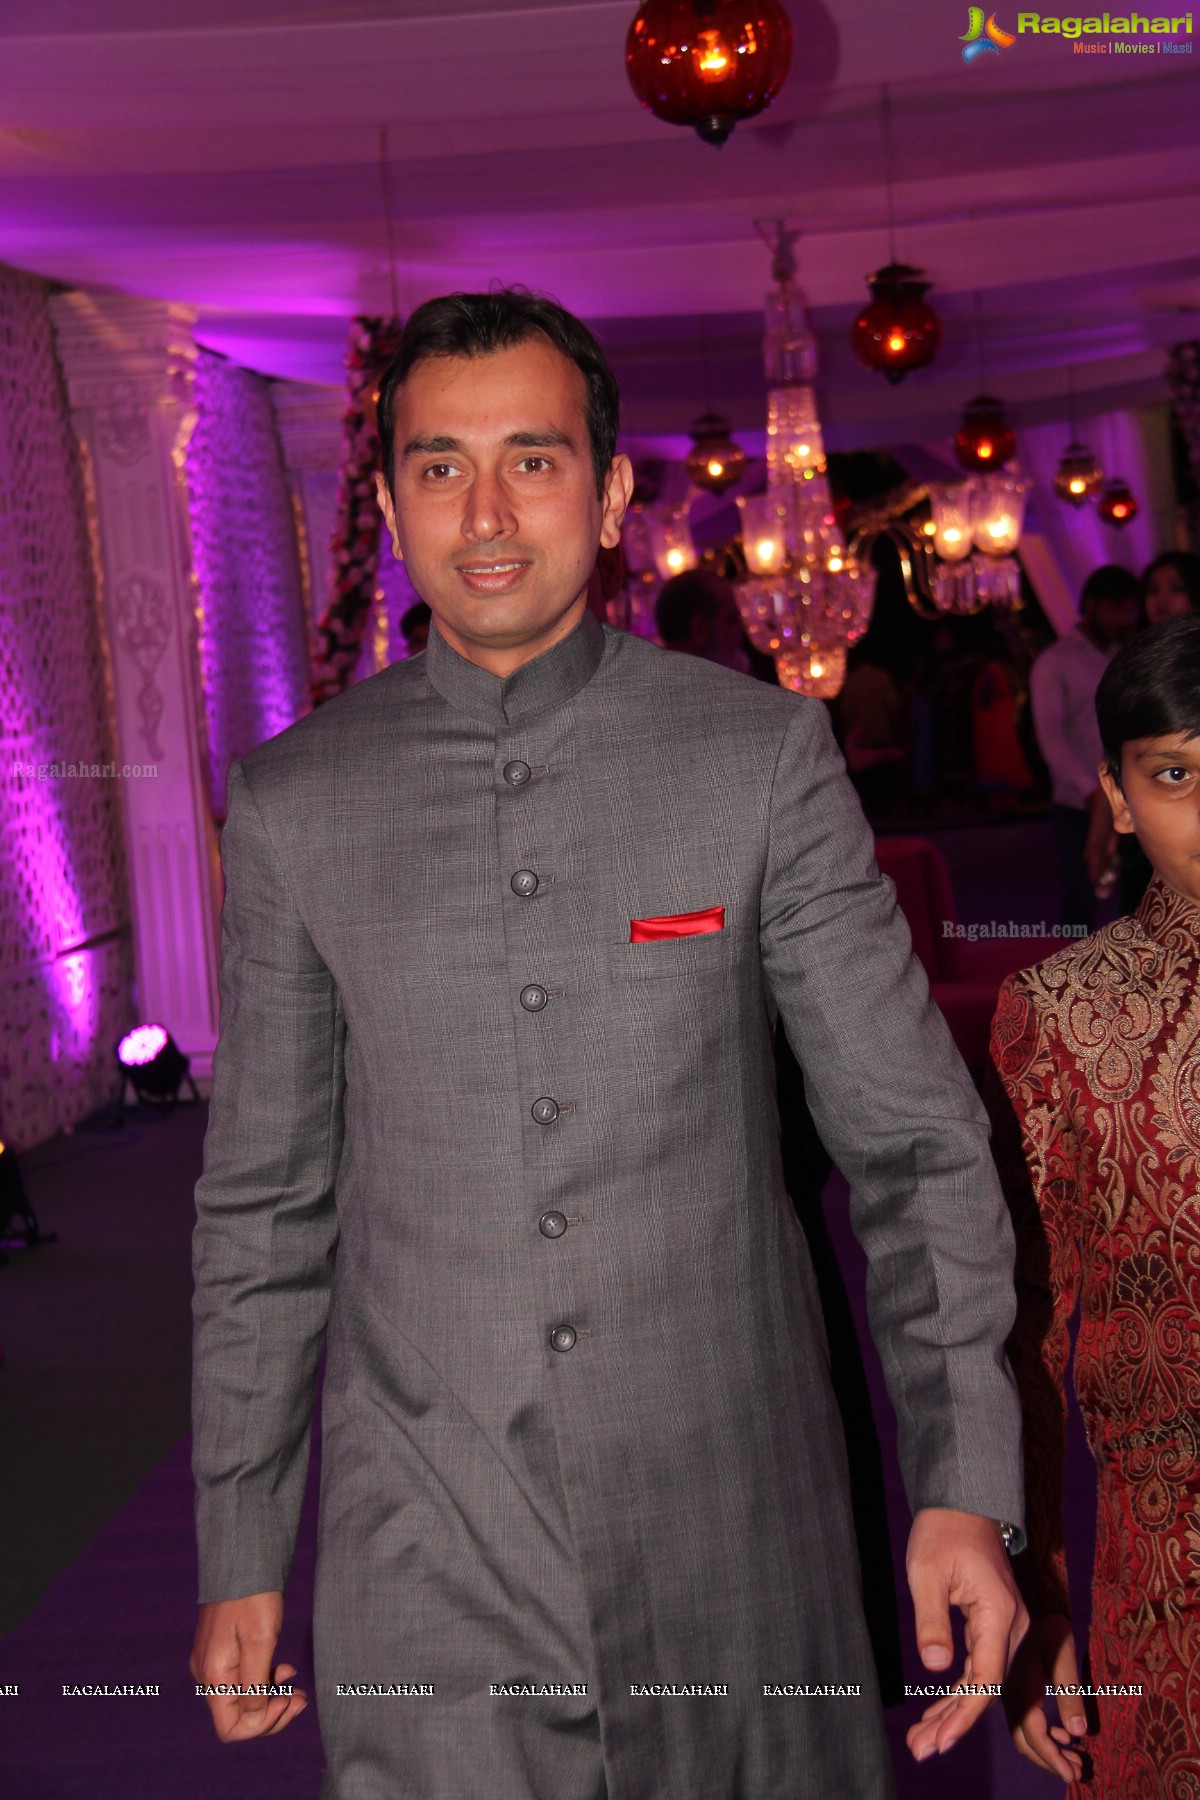 Grand Wedding Ceremony of Bader Alam Khan-Iqra Fatima at Imperial Garden, Hyderabad